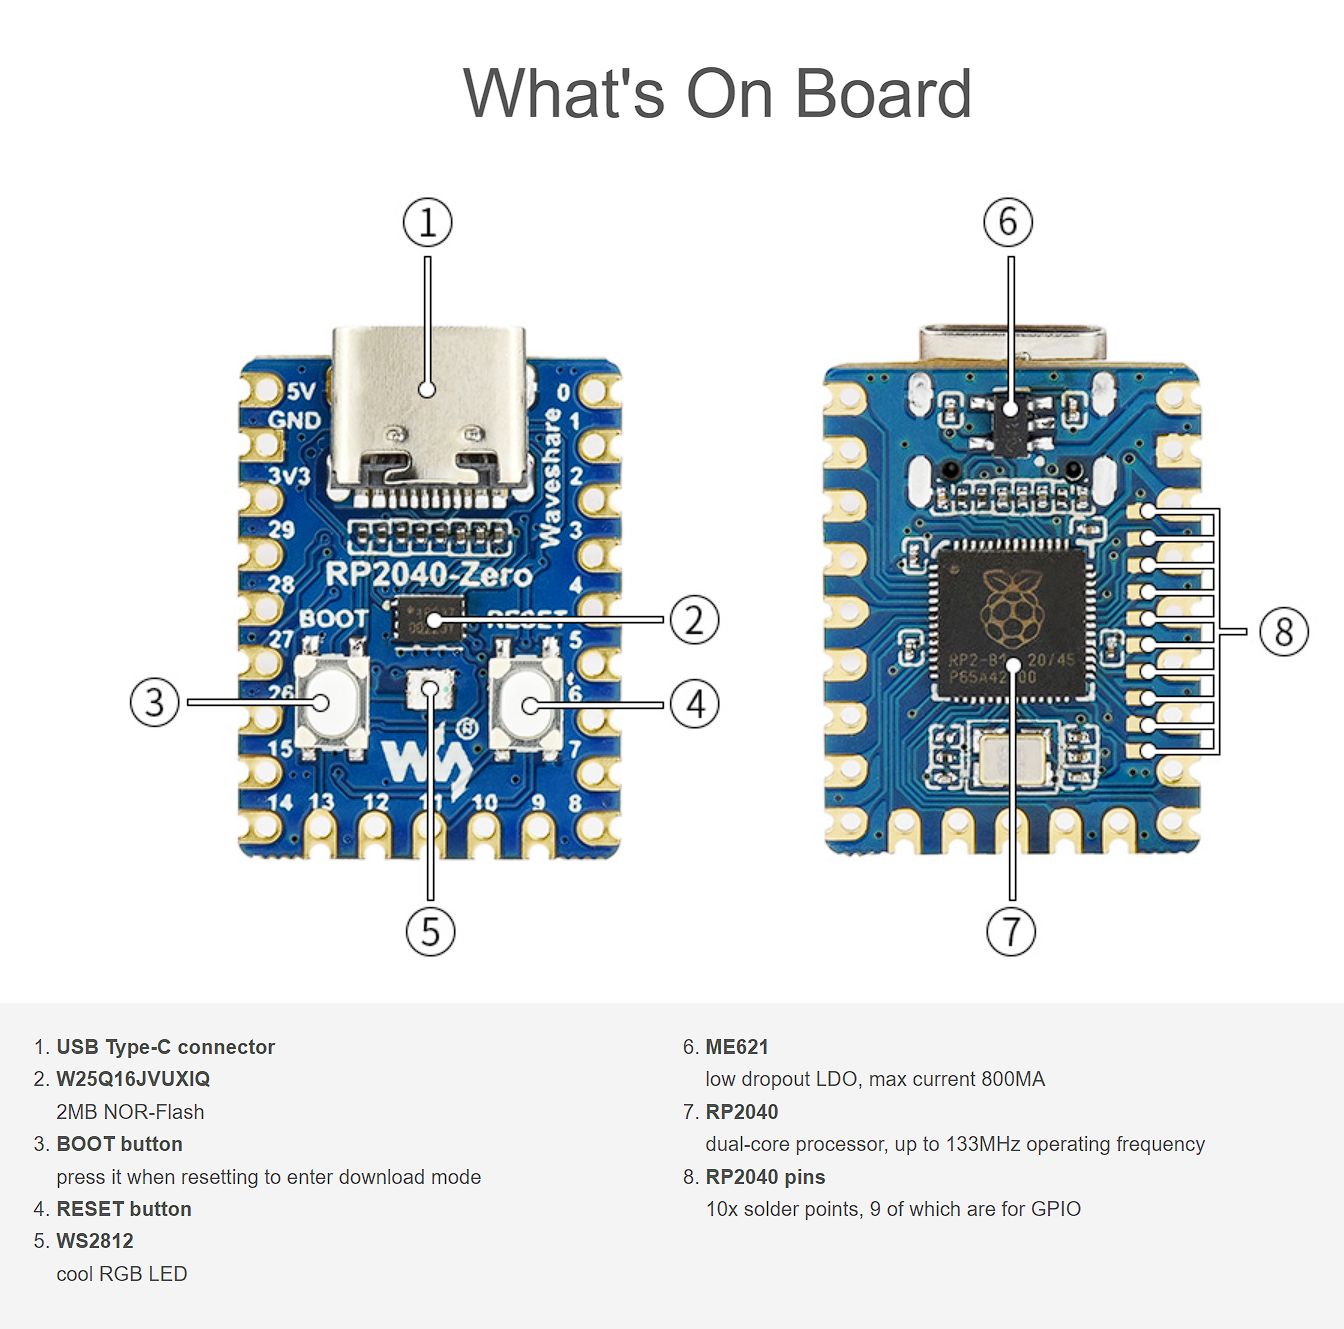 board overview